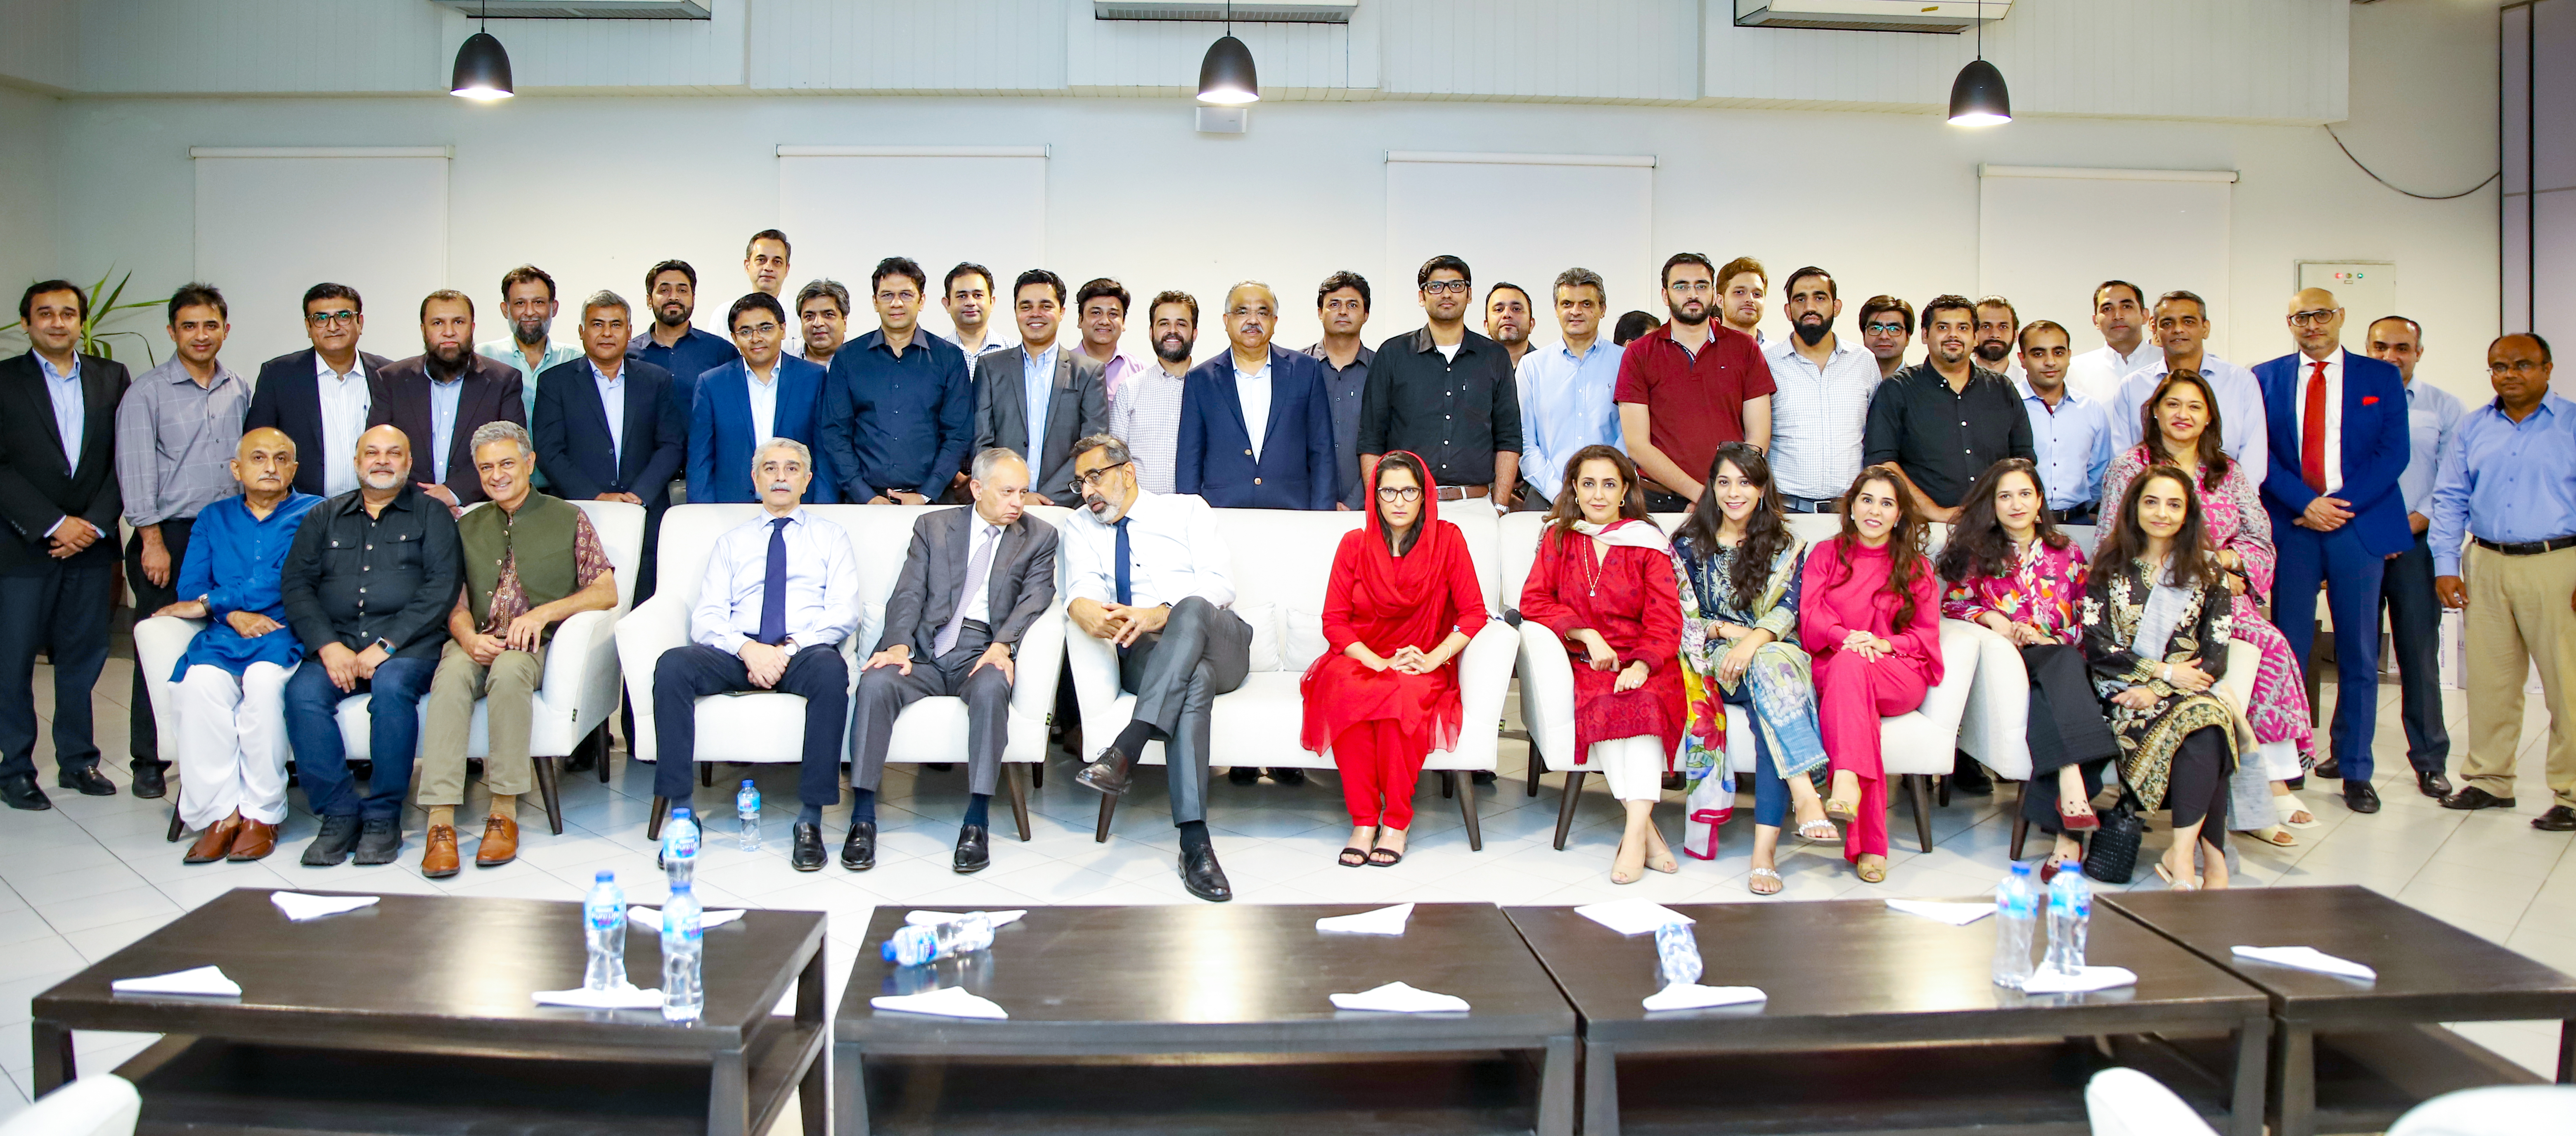 A group photo of all the SDSB Lumnities Association members in attendance and the LUMS leadership